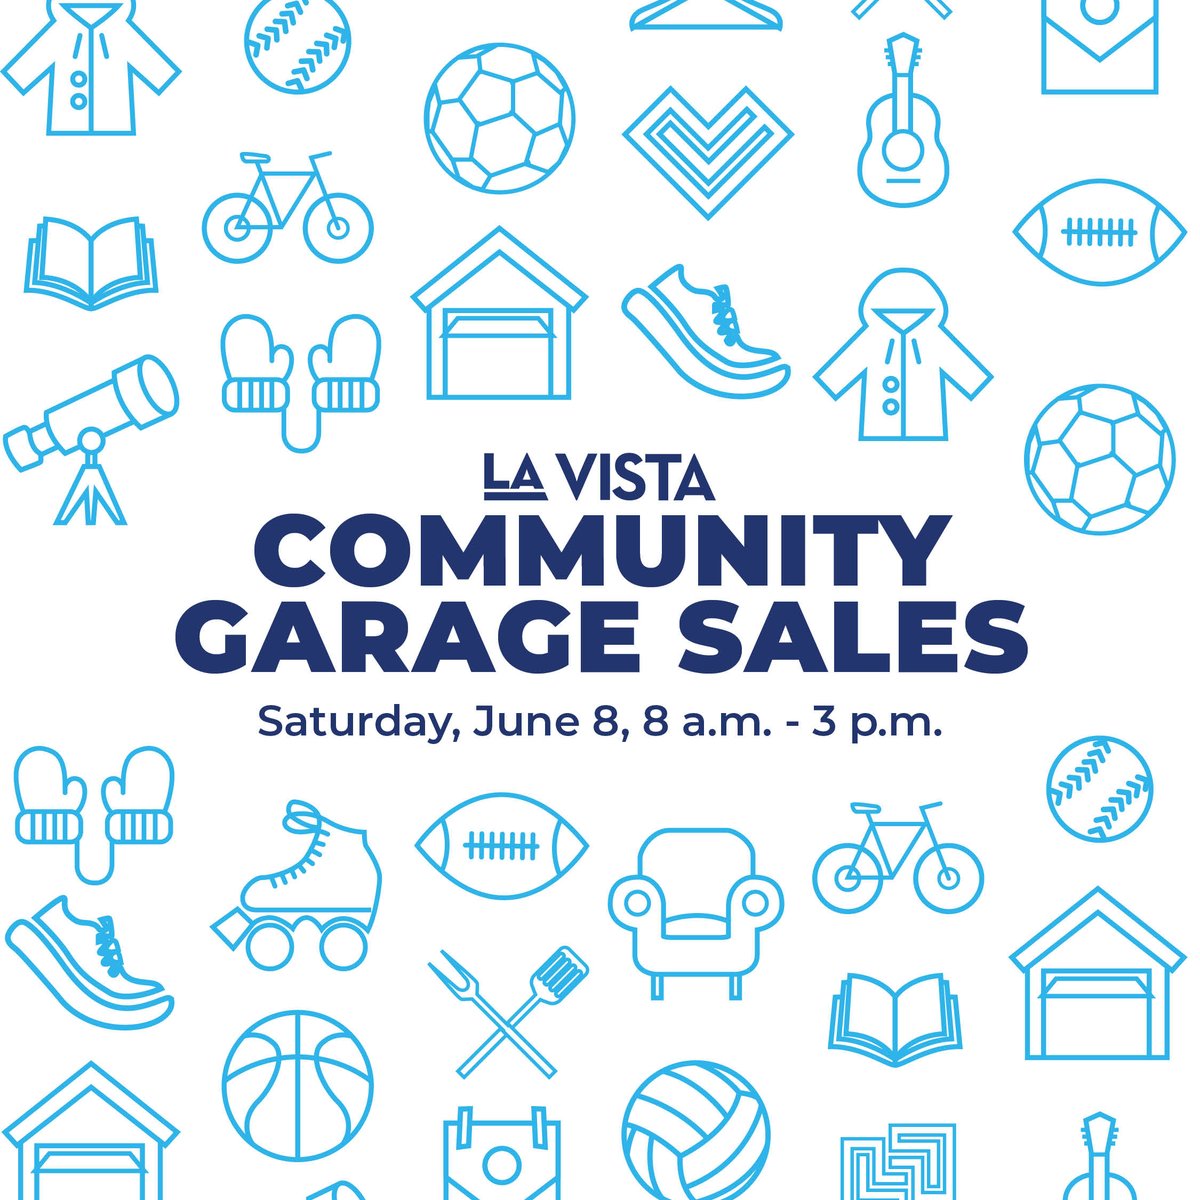 Time is running out to register your garage sale! La Vista residents are invited to host a garage sale at their home on Saturday, June 8. We'll advertise sales and provide garage sale signs for free. Sign up by May 24 to be included on the City's map. CityofLaVista.org/GarageSales